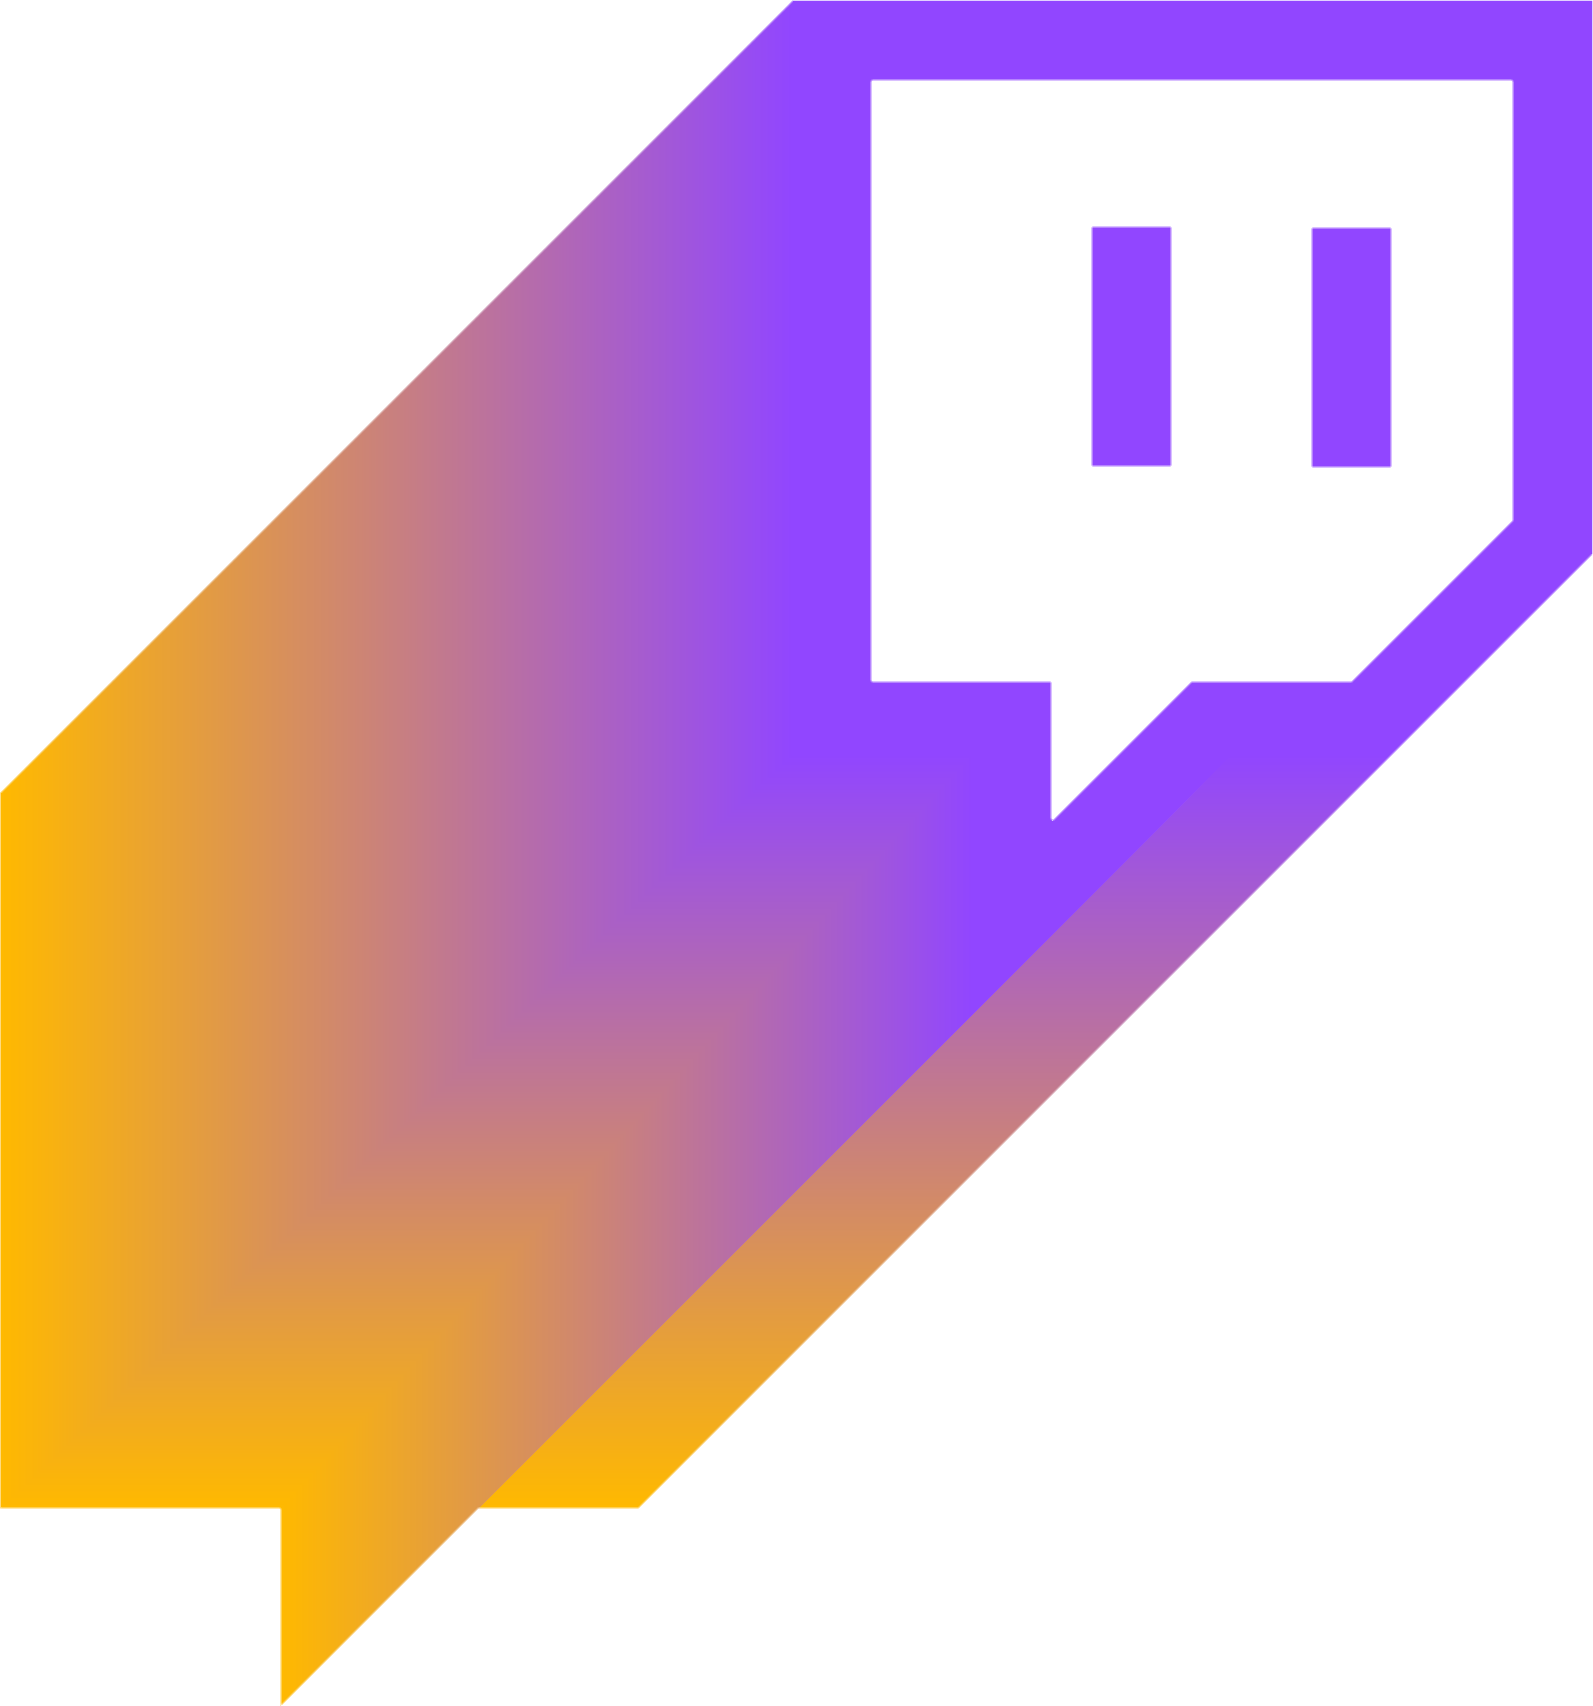 twitch-logo-png-from-pngfre-11